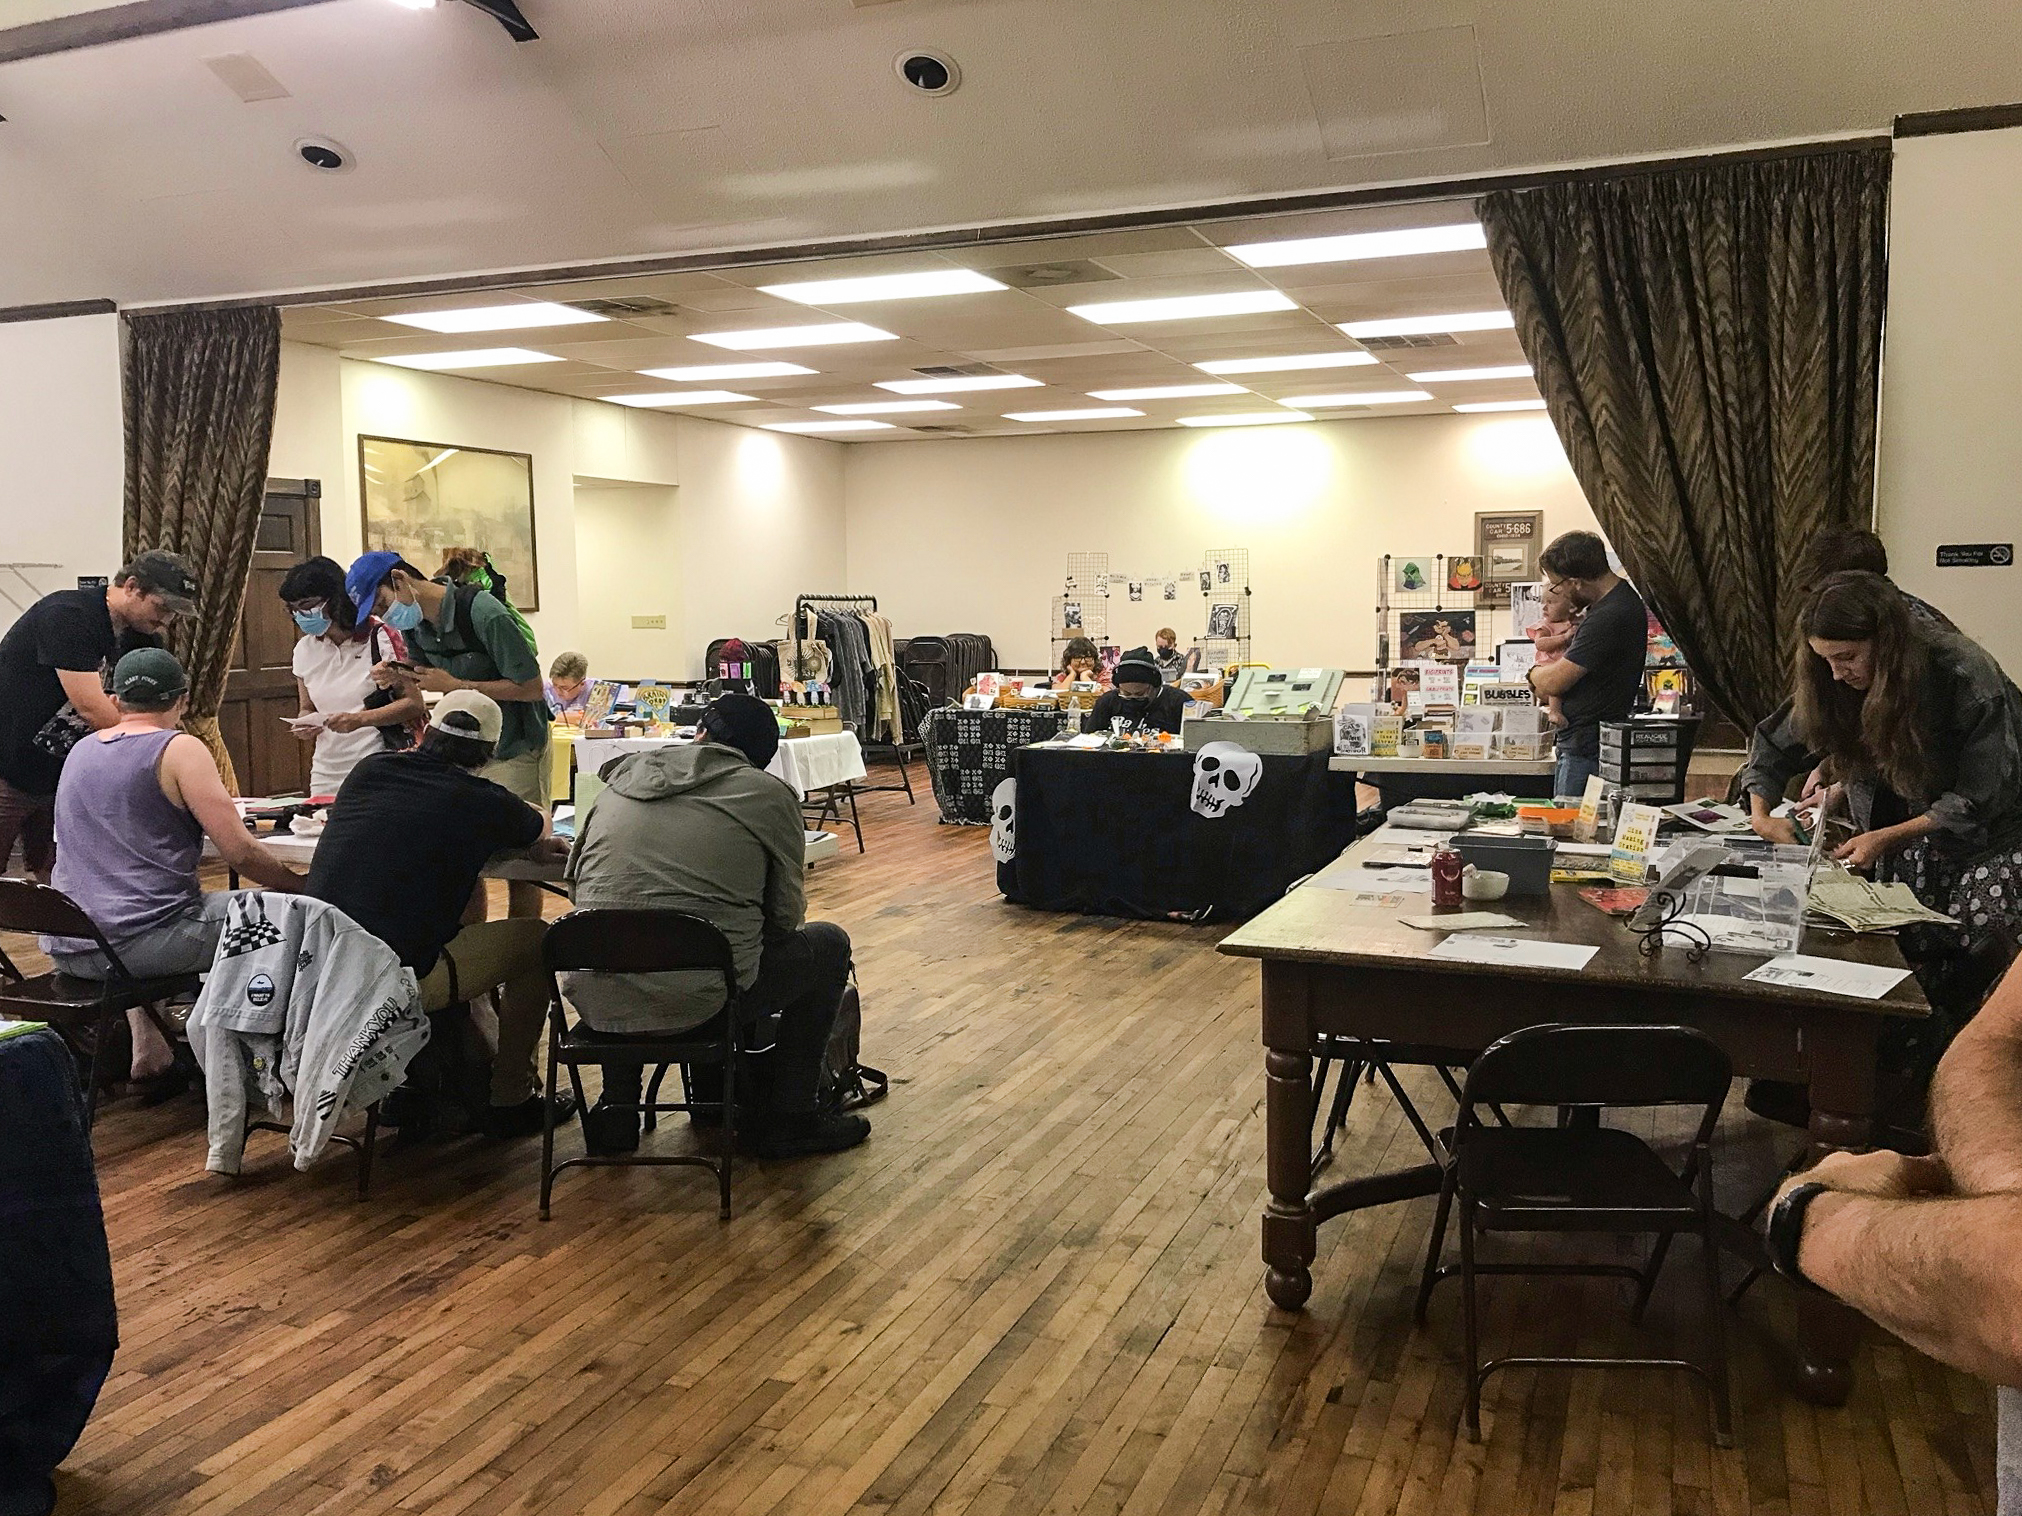 An indoor zine fest with many tables filled with papers